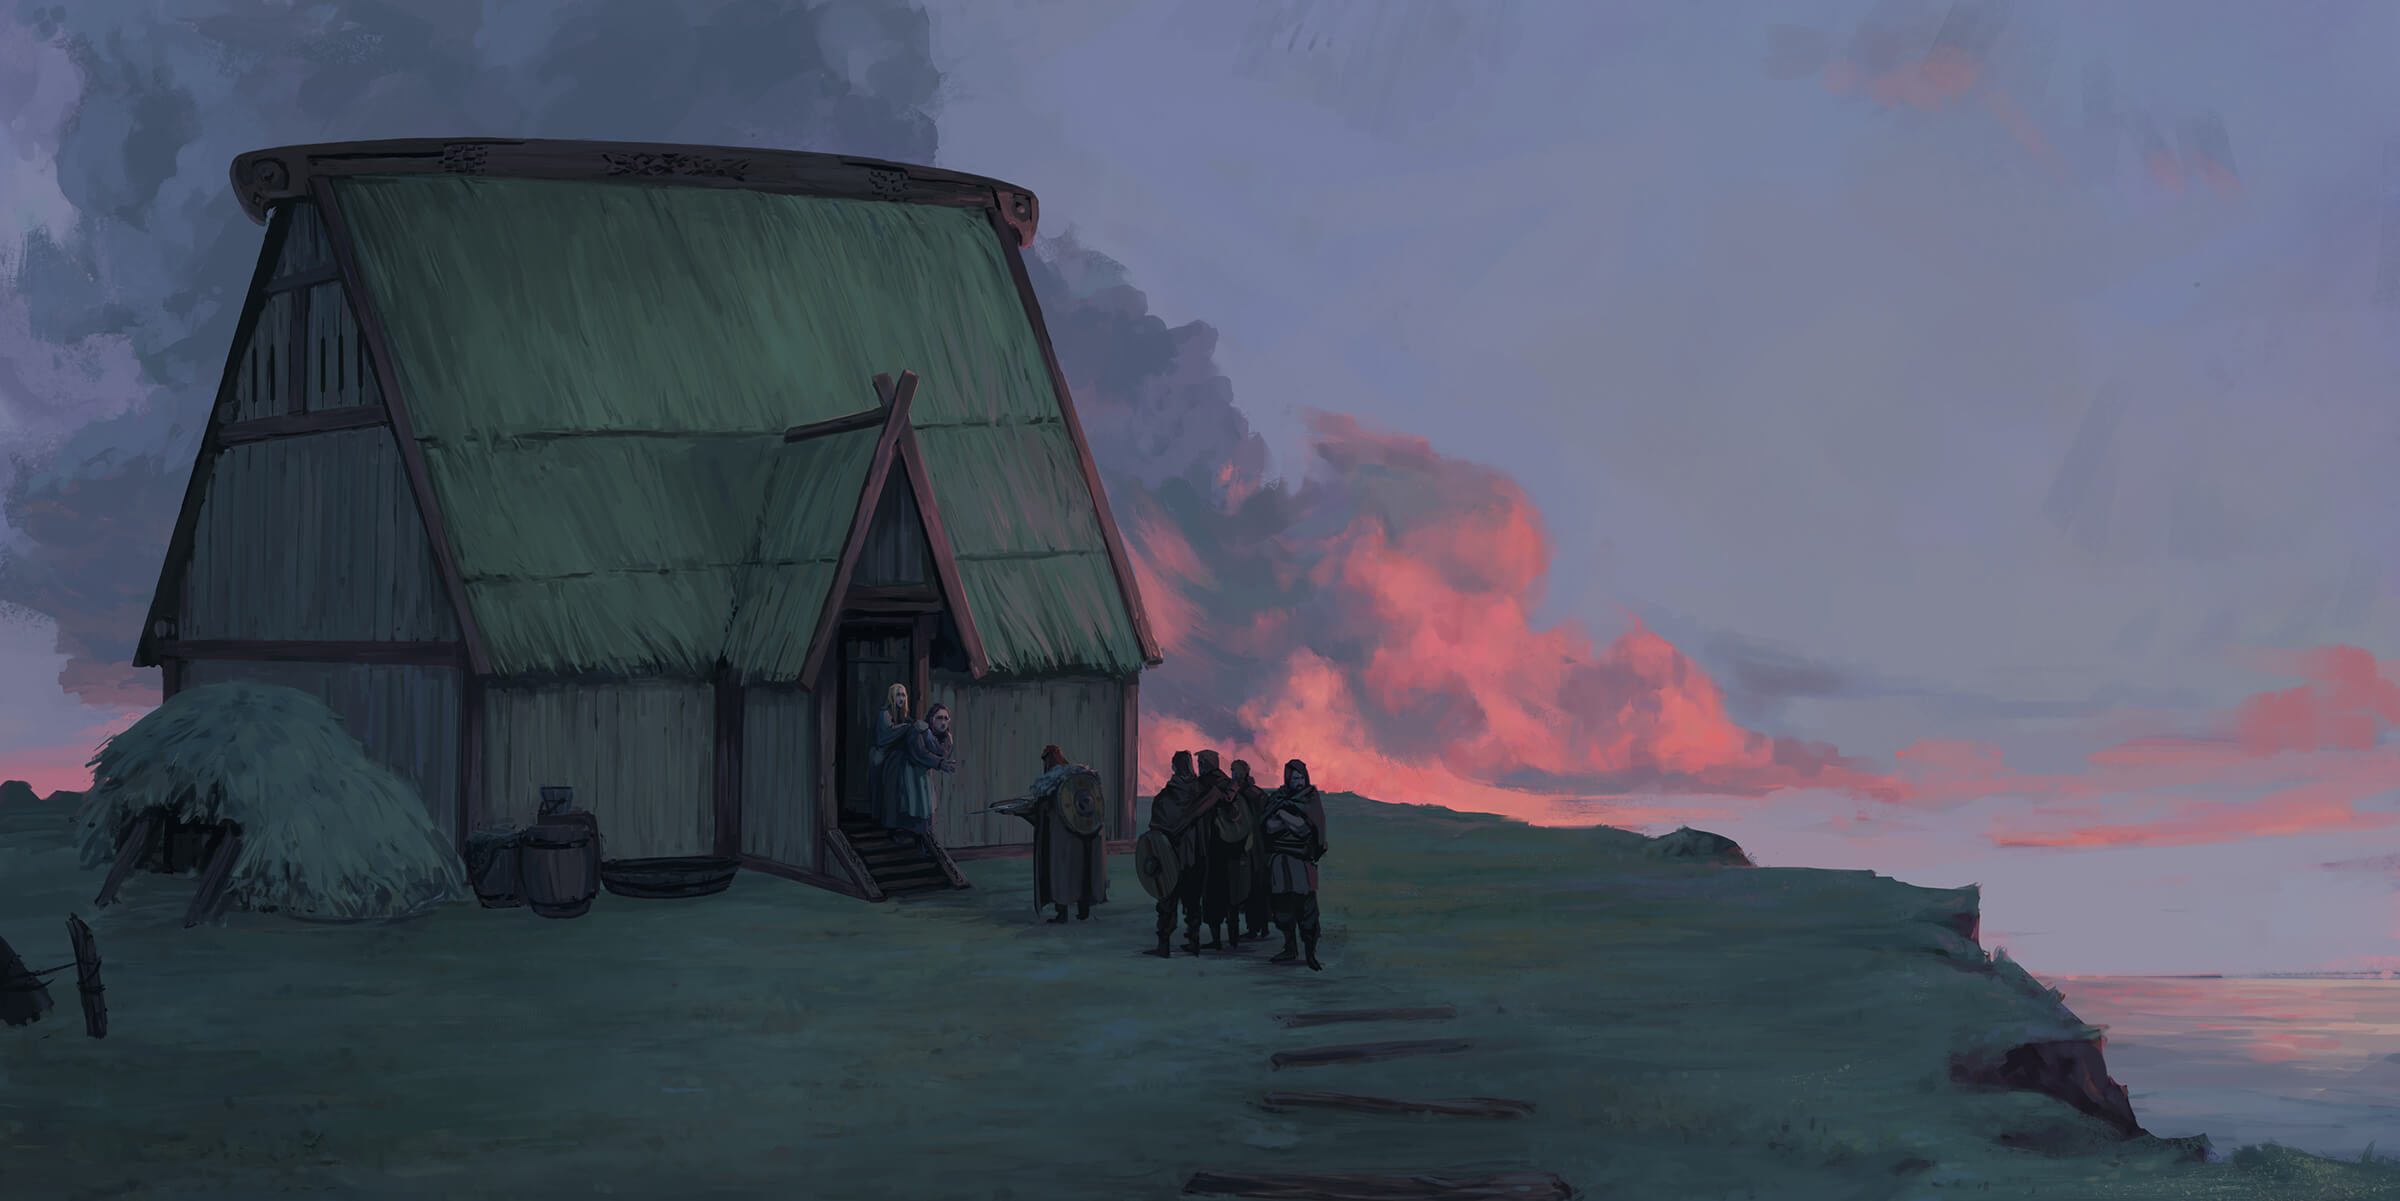 News being delivered to inhabitants of a thatched barn at sunset